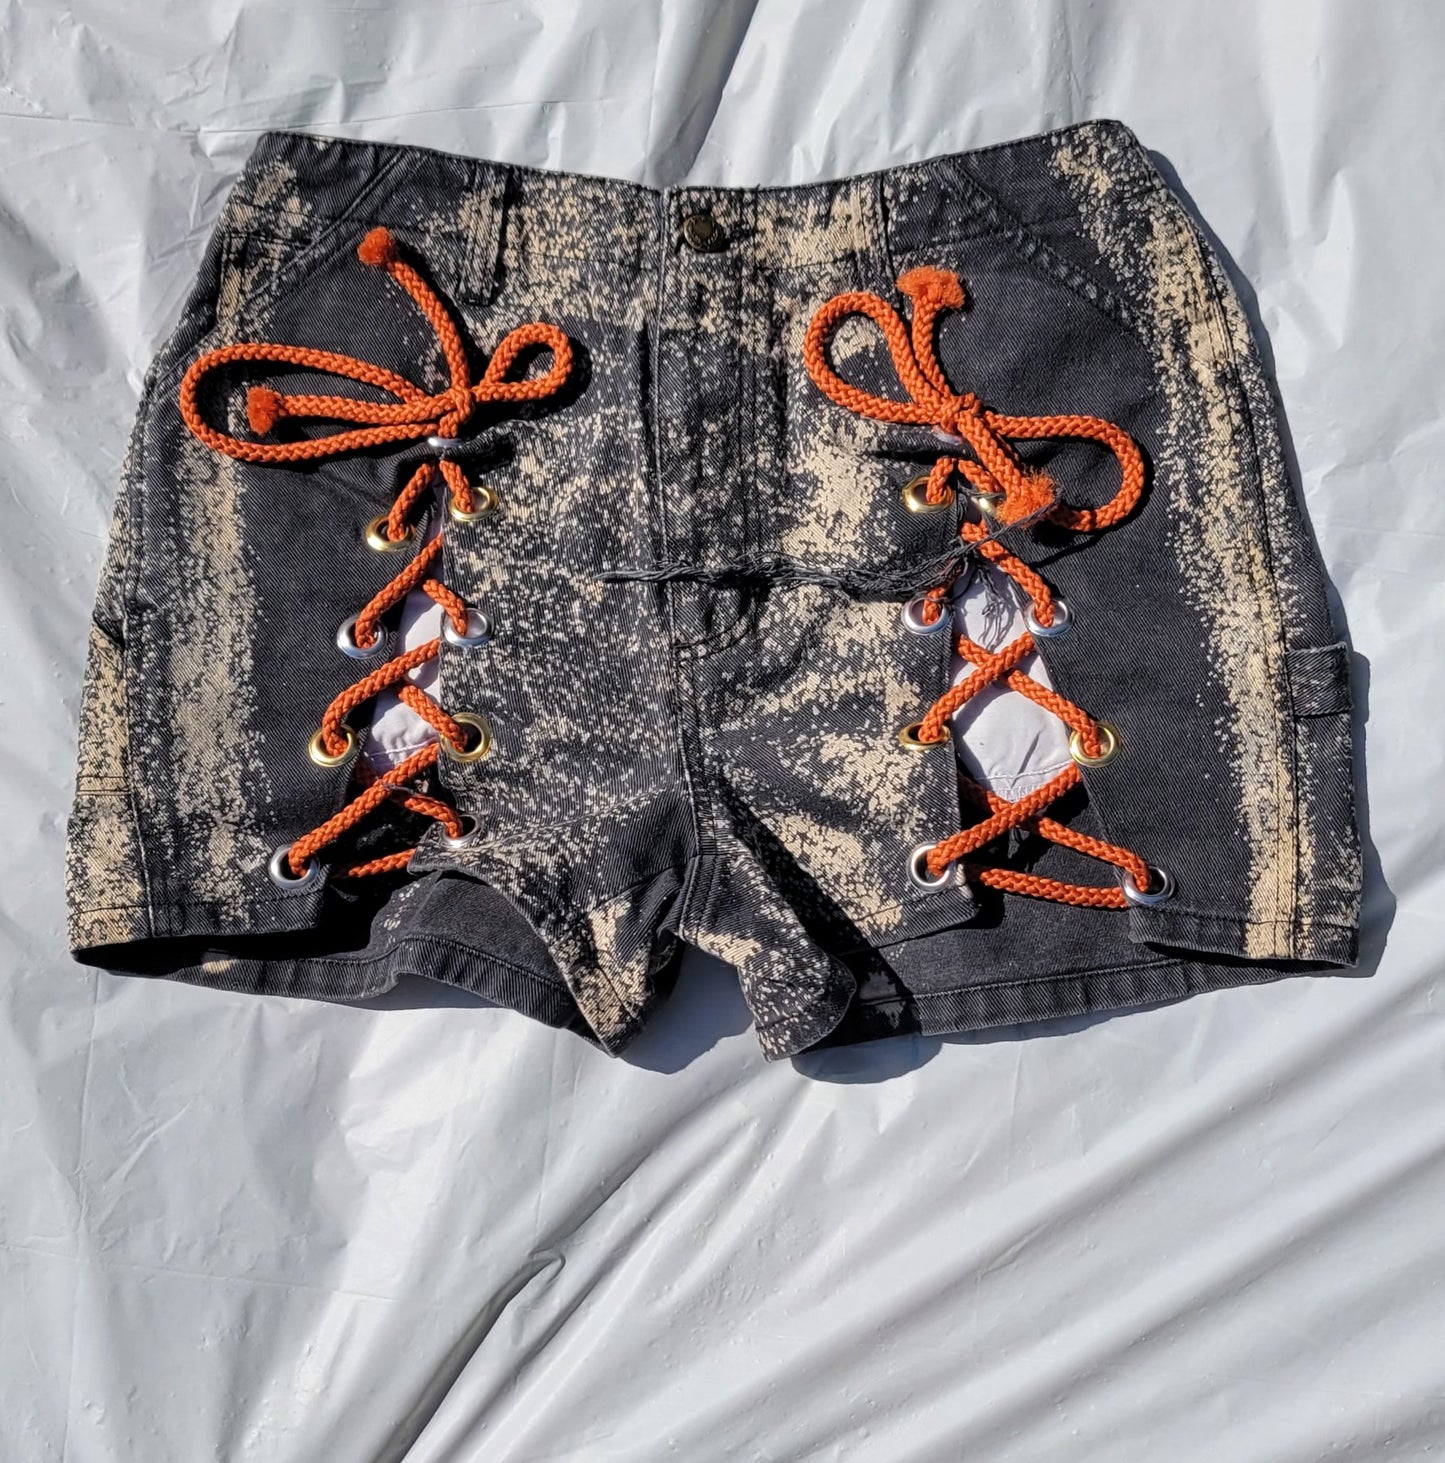 "Get Ready for Summer/ Spring Fun with Our Custom Women's Beach Splash Shorts"